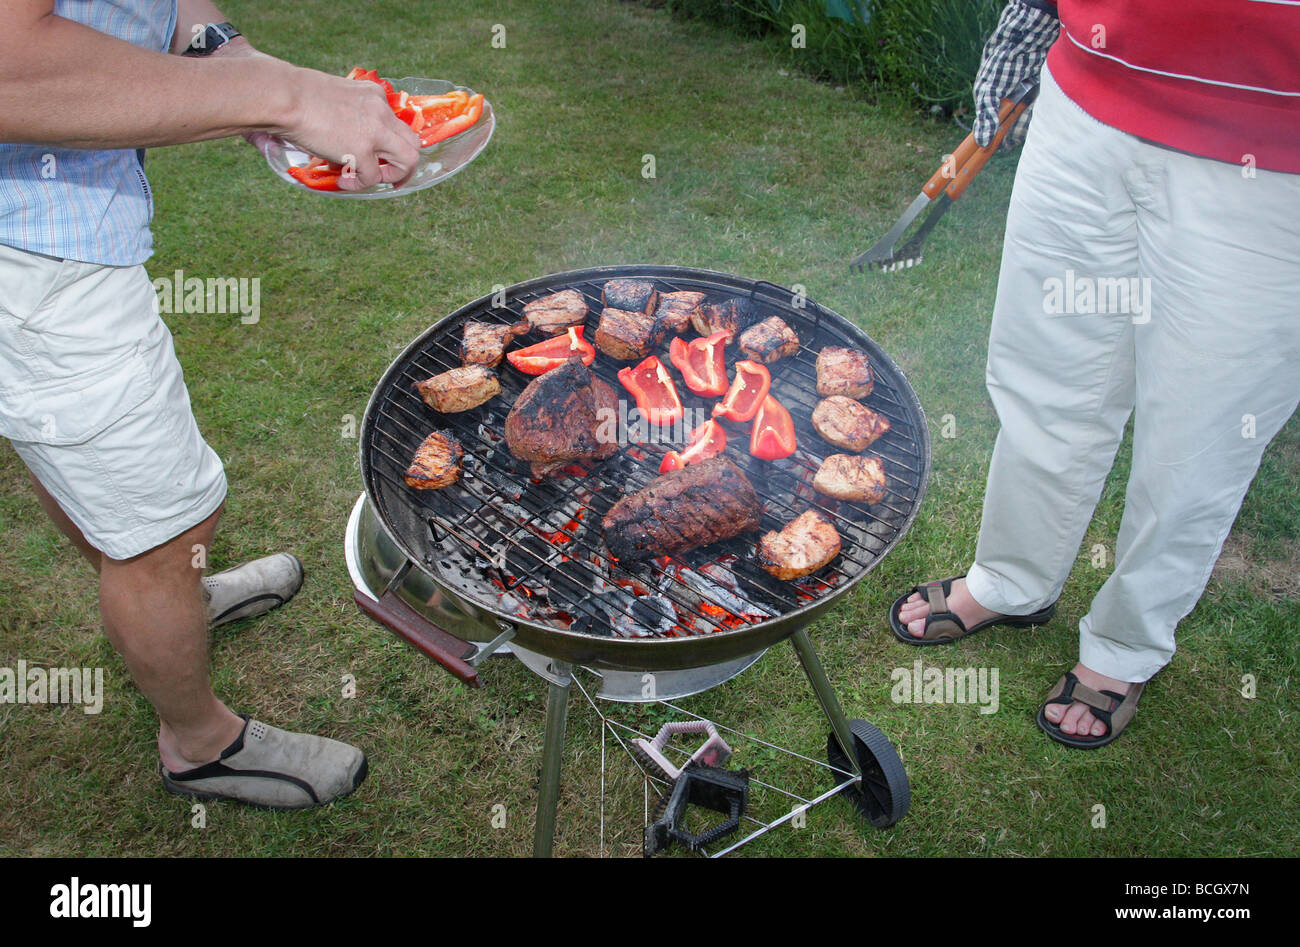 Barbeque Sweden typical Swedish family having a traditional bbq at summer men by the grill cooking the fillet of beef and pork Stock Photo